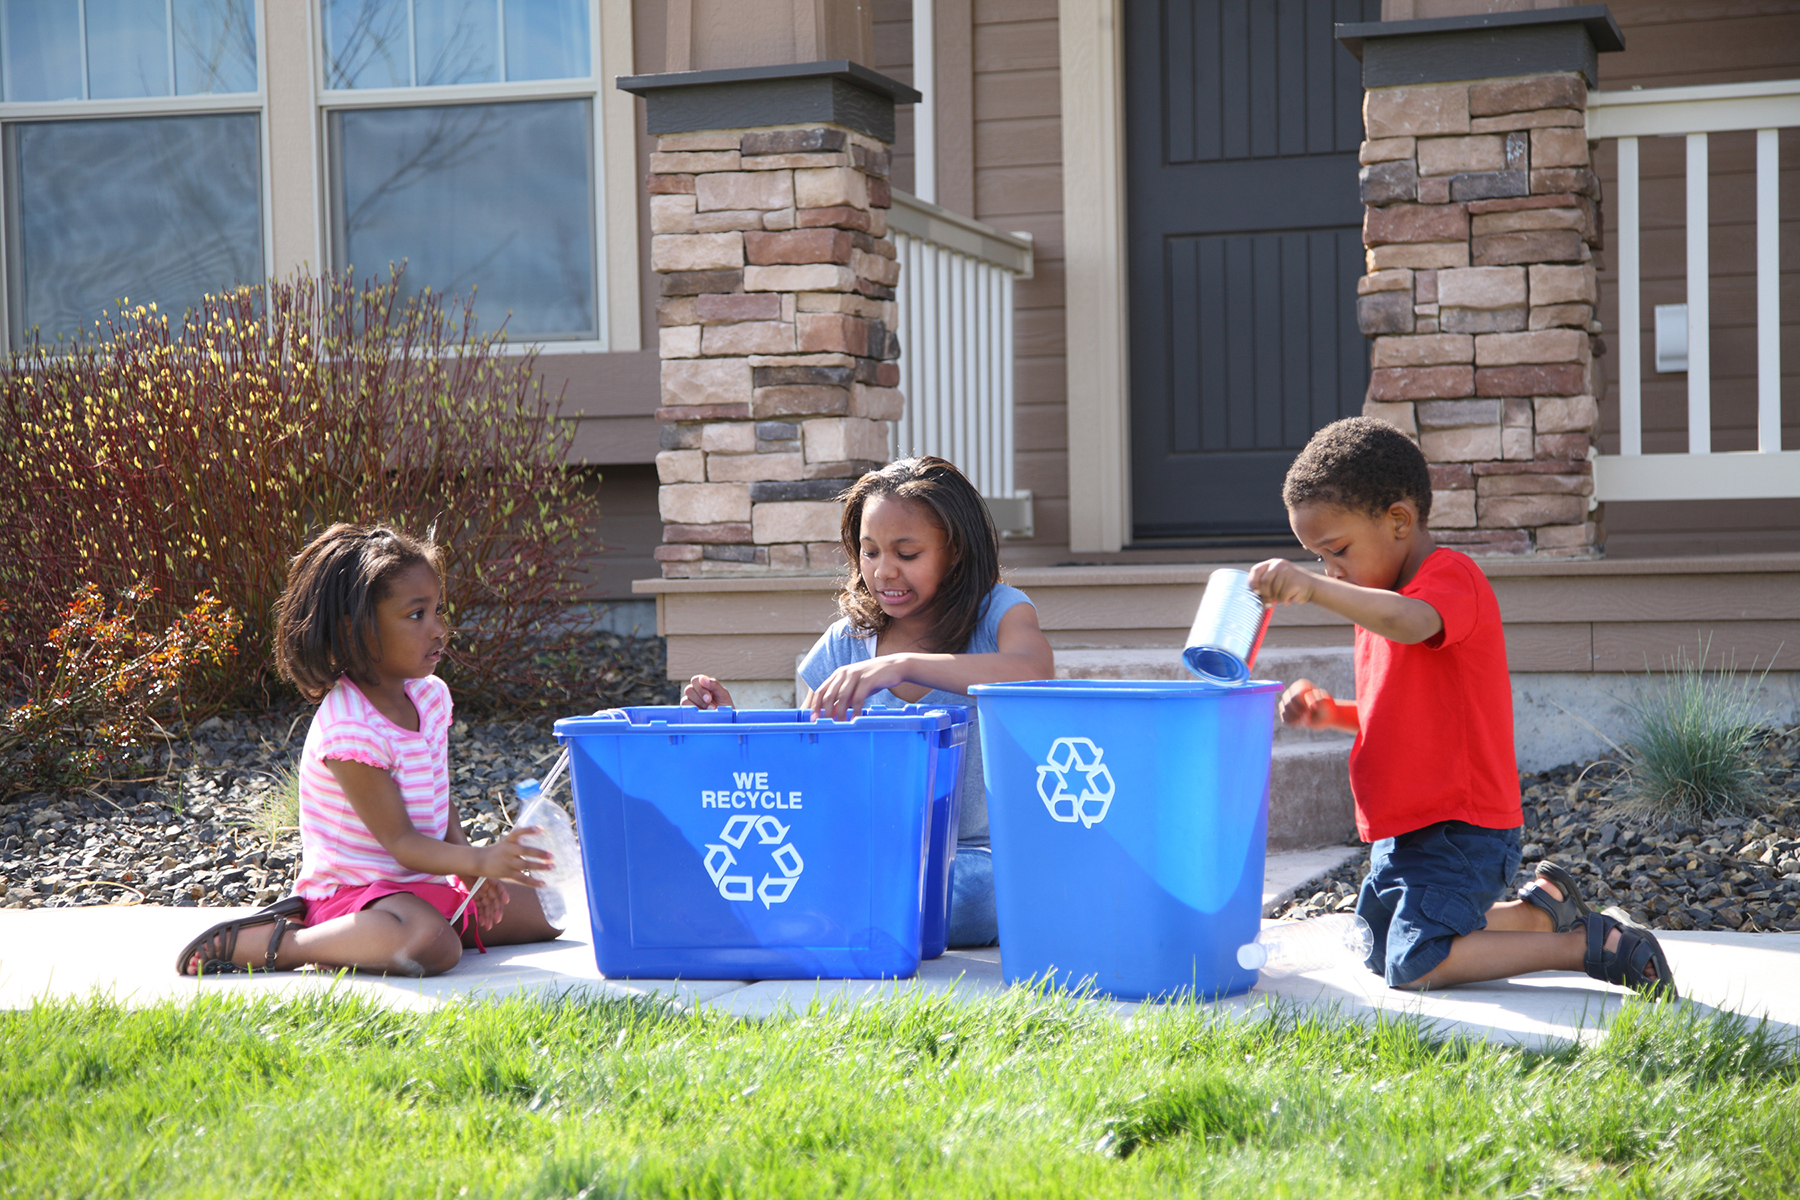 Consumers are reminded to maintain or begin good recycling habits on Earth Day to help sustain our environment